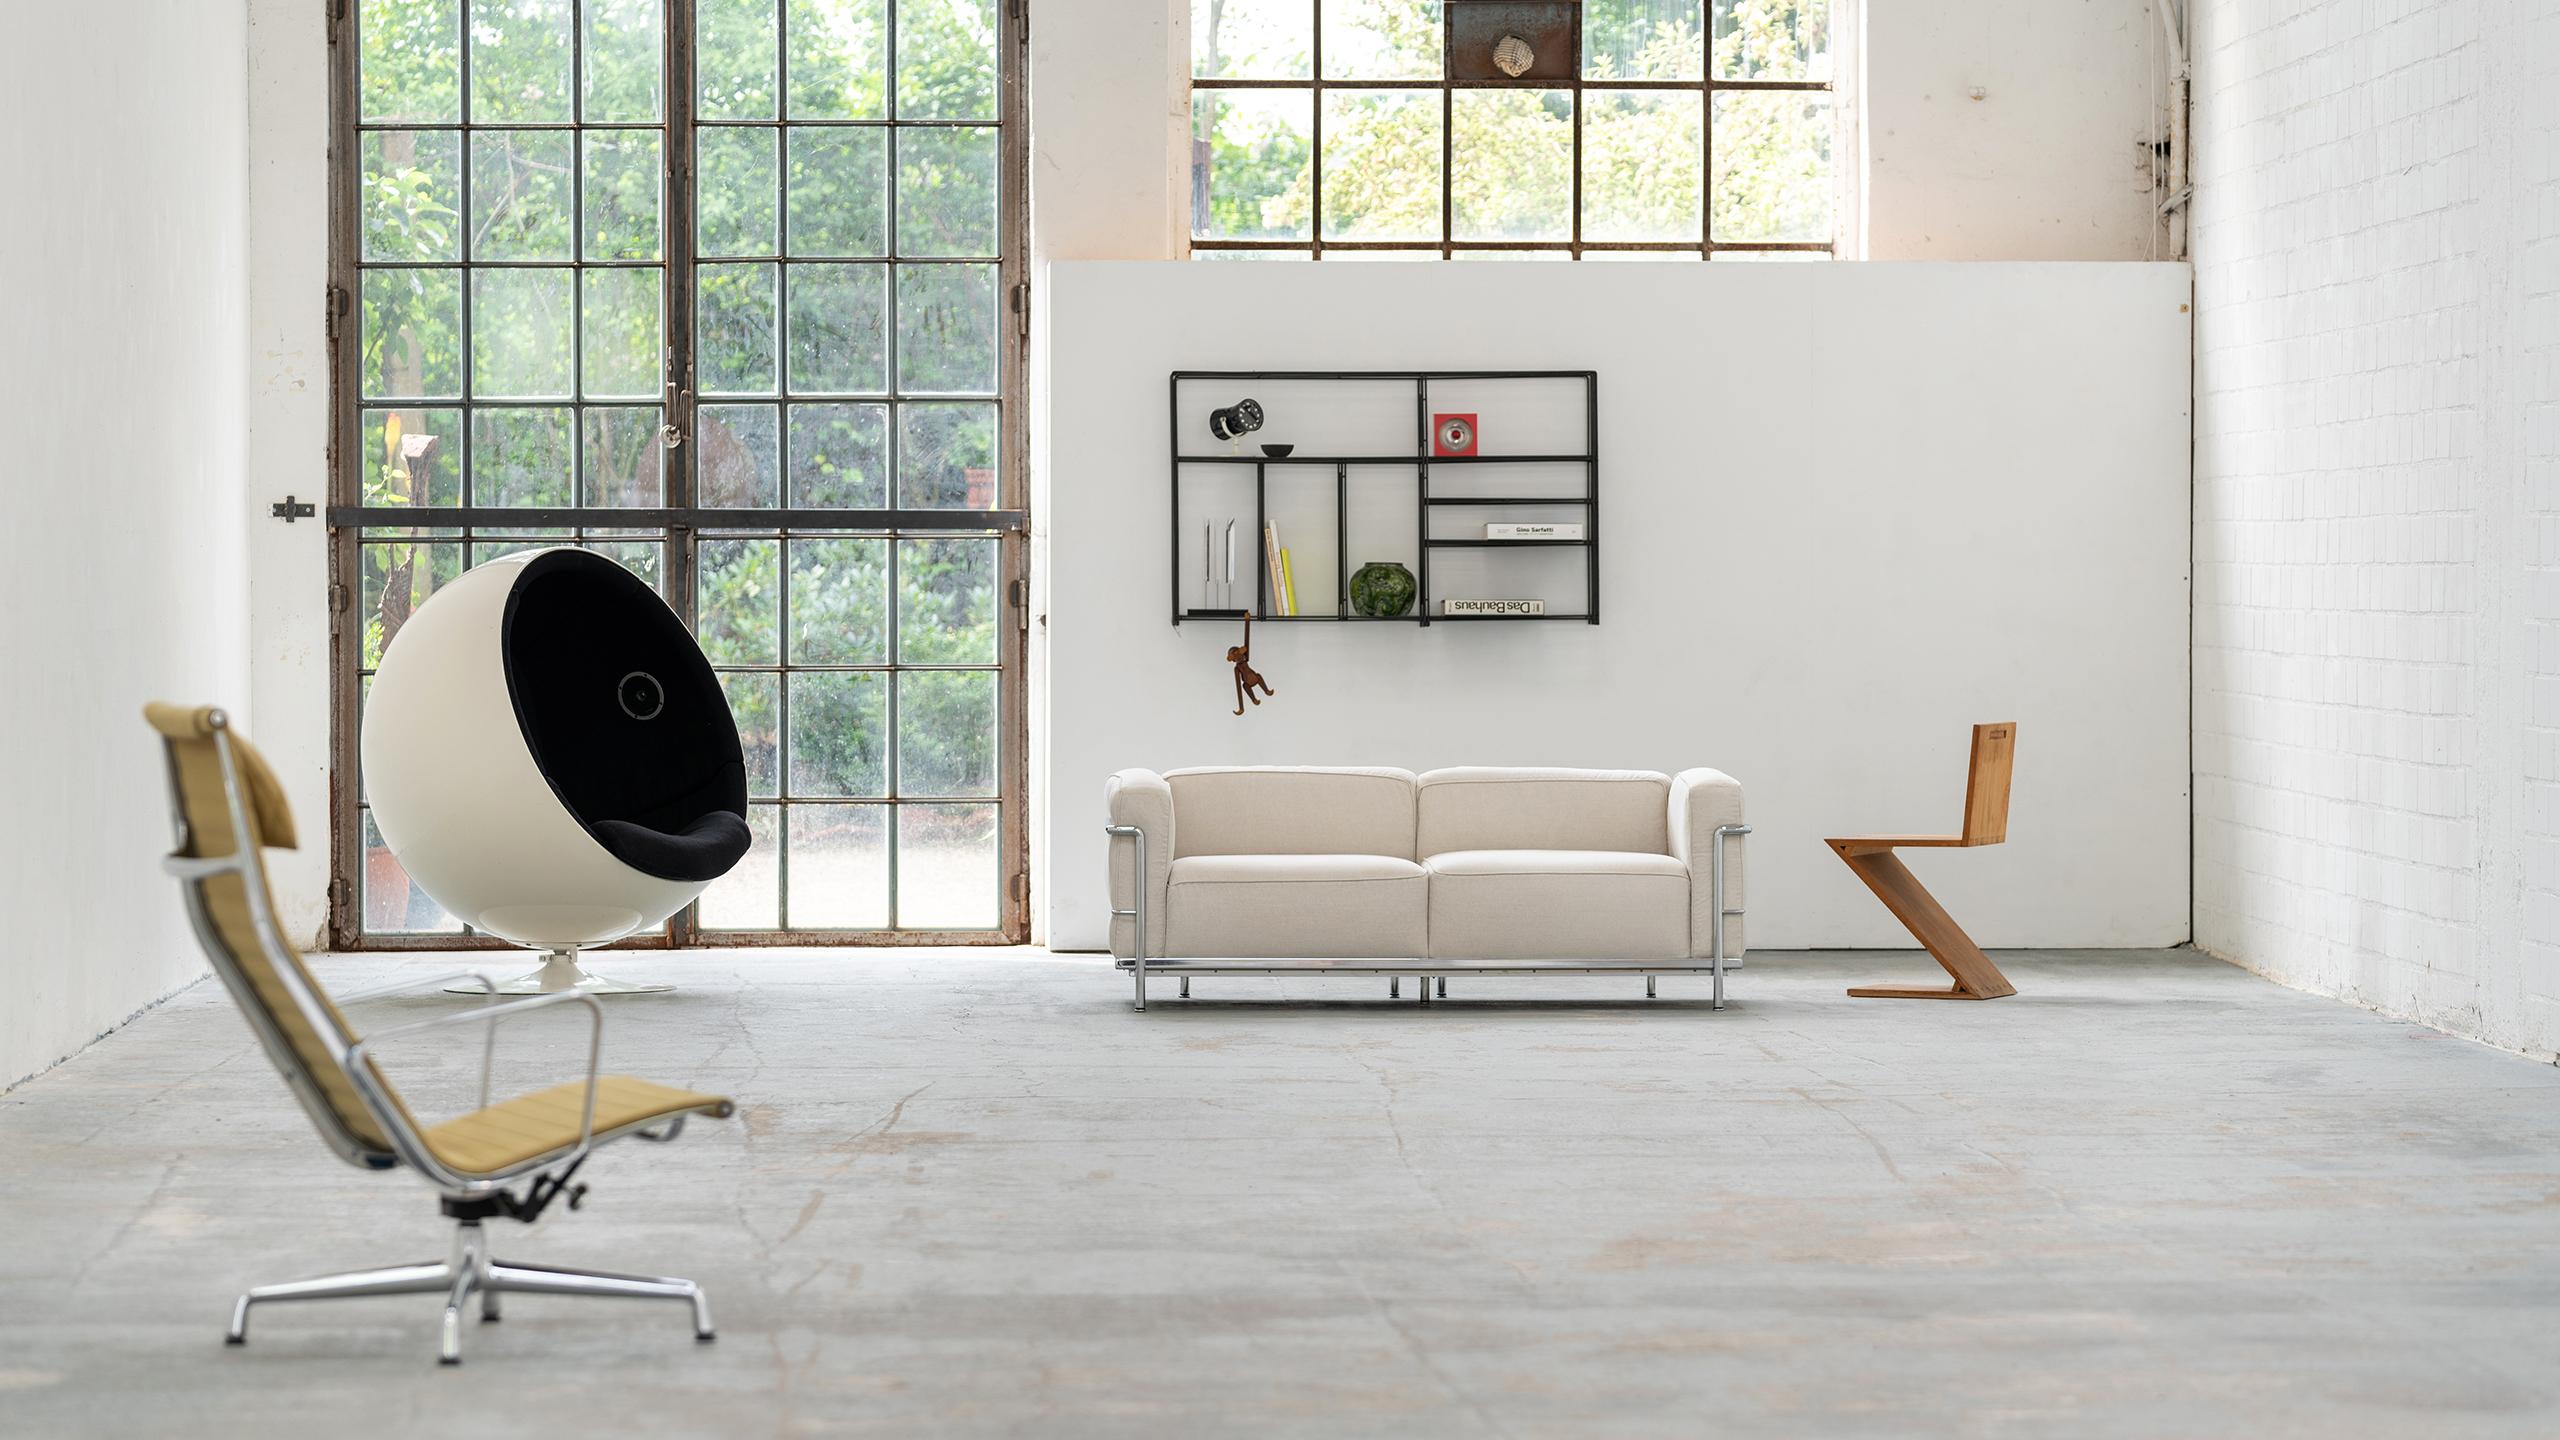 Cassina LC3 sofa by Le Corbusier, Pierre Jeanneret and Charlotte Perriand with Tarò linen cover.

In contrast to the LC2 sofa, the LC3 sofa is designed with much more generous proportions (and a little lower). 

LC3 Sofa 2-seater: Dimensions: